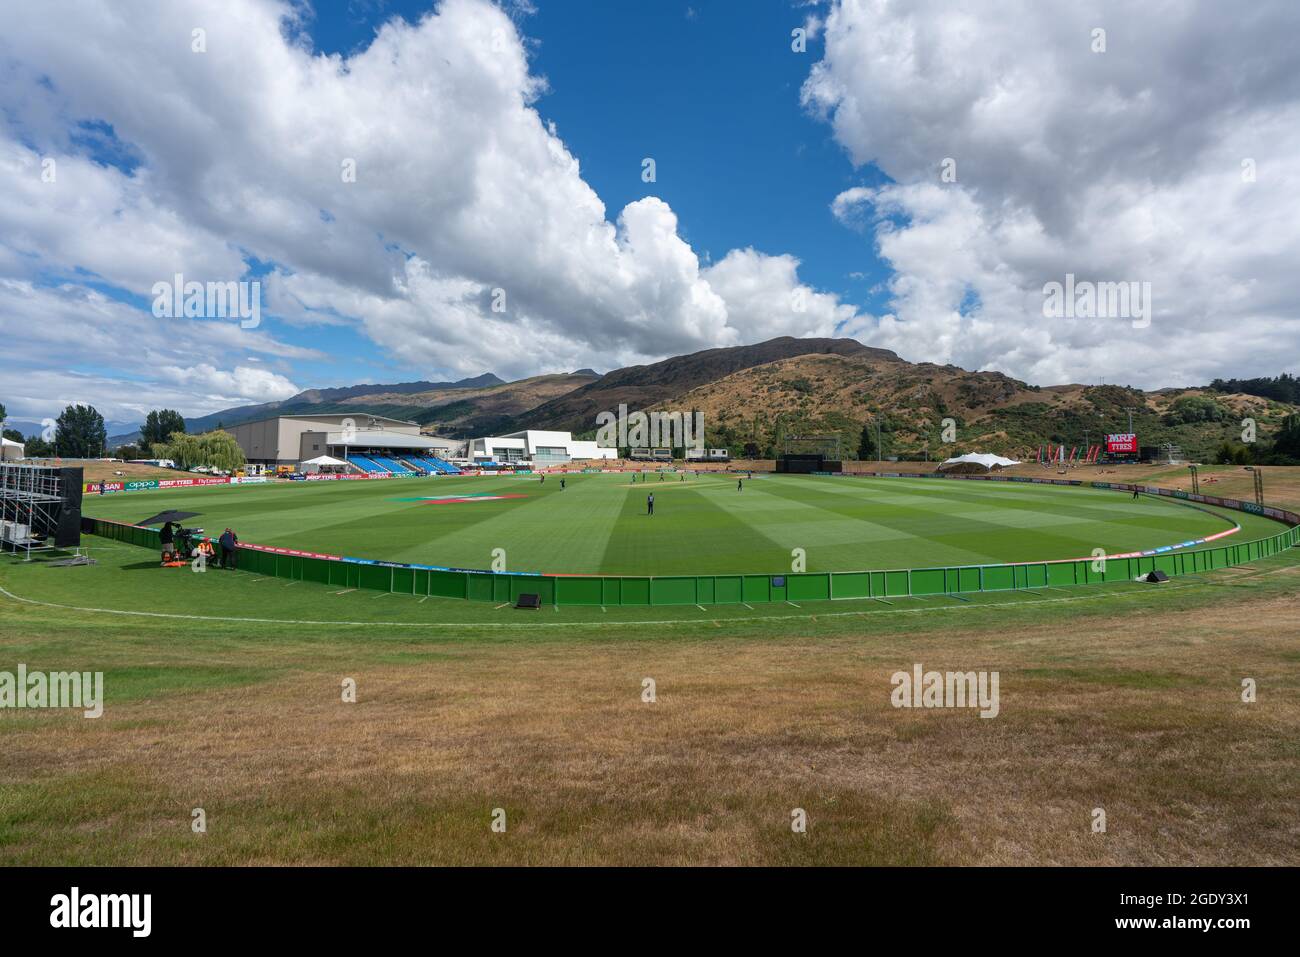 Queenstown, New Zealand - Jan 18, 2018: Cricket stadium with competion and large hill in the back Stock Photo